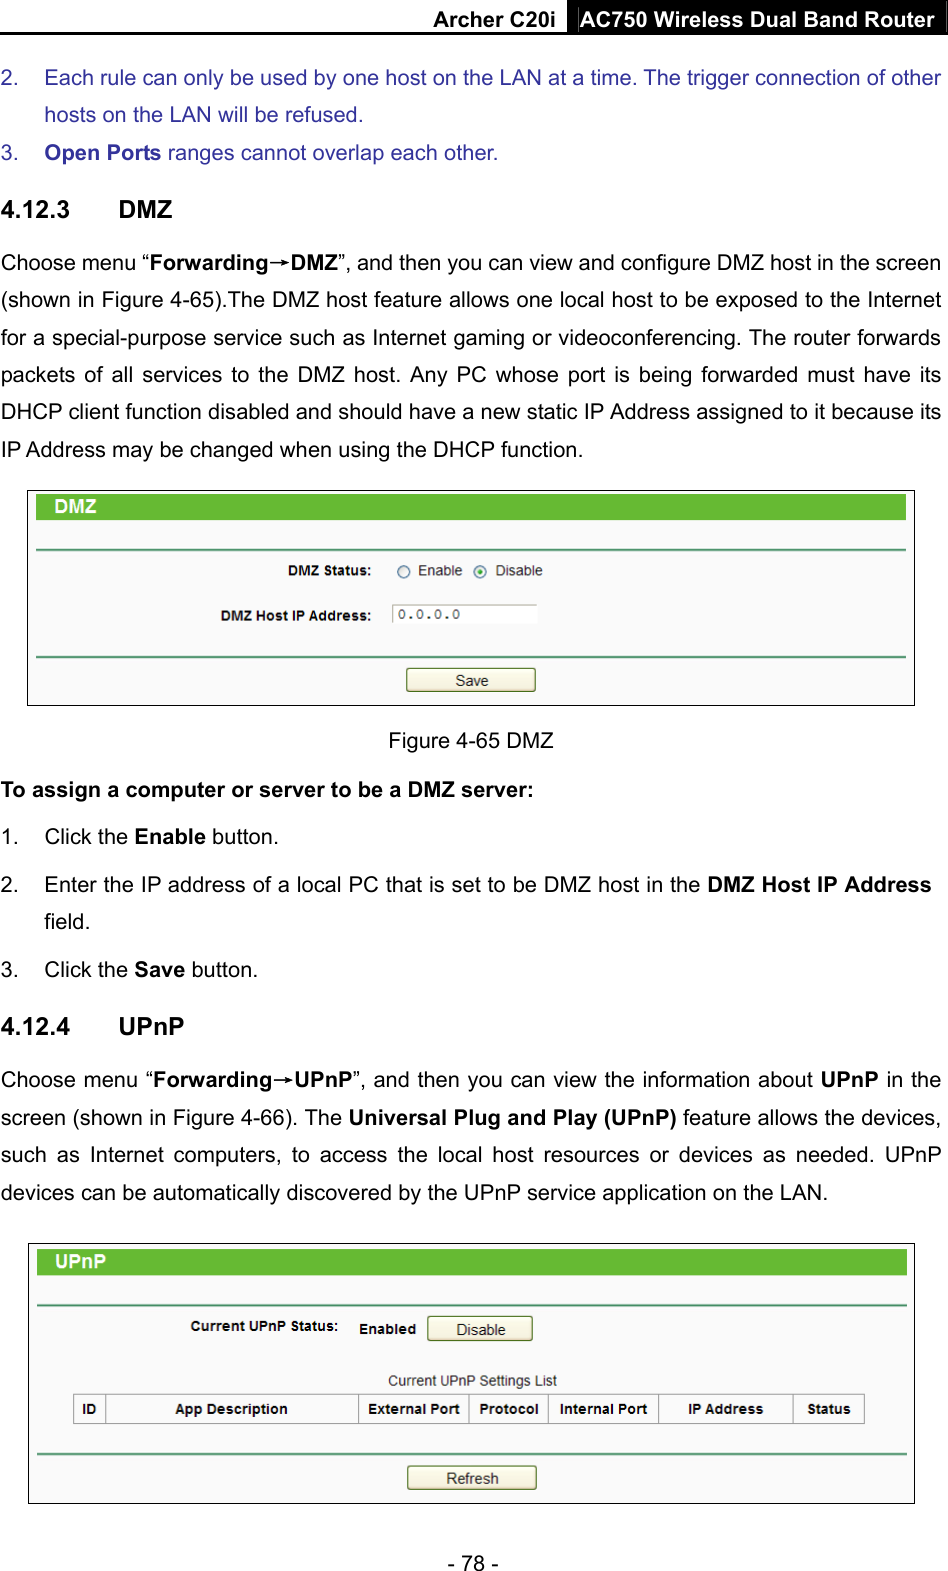 Archer C20i AC750 Wireless Dual Band Router - 78 - 2.  Each rule can only be used by one host on the LAN at a time. The trigger connection of other hosts on the LAN will be refused.   3.  Open Ports ranges cannot overlap each other.   4.12.3  DMZ Choose menu “Forwarding→DMZ”, and then you can view and configure DMZ host in the screen (shown in Figure 4-65).The DMZ host feature allows one local host to be exposed to the Internet for a special-purpose service such as Internet gaming or videoconferencing. The router forwards packets of all services to the DMZ host. Any PC whose port is being forwarded must have its DHCP client function disabled and should have a new static IP Address assigned to it because its IP Address may be changed when using the DHCP function.  Figure 4-65 DMZ To assign a computer or server to be a DMZ server:   1. Click the Enable button.   2.  Enter the IP address of a local PC that is set to be DMZ host in the DMZ Host IP Address field.  3. Click the Save button.   4.12.4  UPnP Choose menu “Forwarding→UPnP”, and then you can view the information about UPnP in the screen (shown in Figure 4-66). The Universal Plug and Play (UPnP) feature allows the devices, such as Internet computers, to access the local host resources or devices as needed. UPnP devices can be automatically discovered by the UPnP service application on the LAN.  